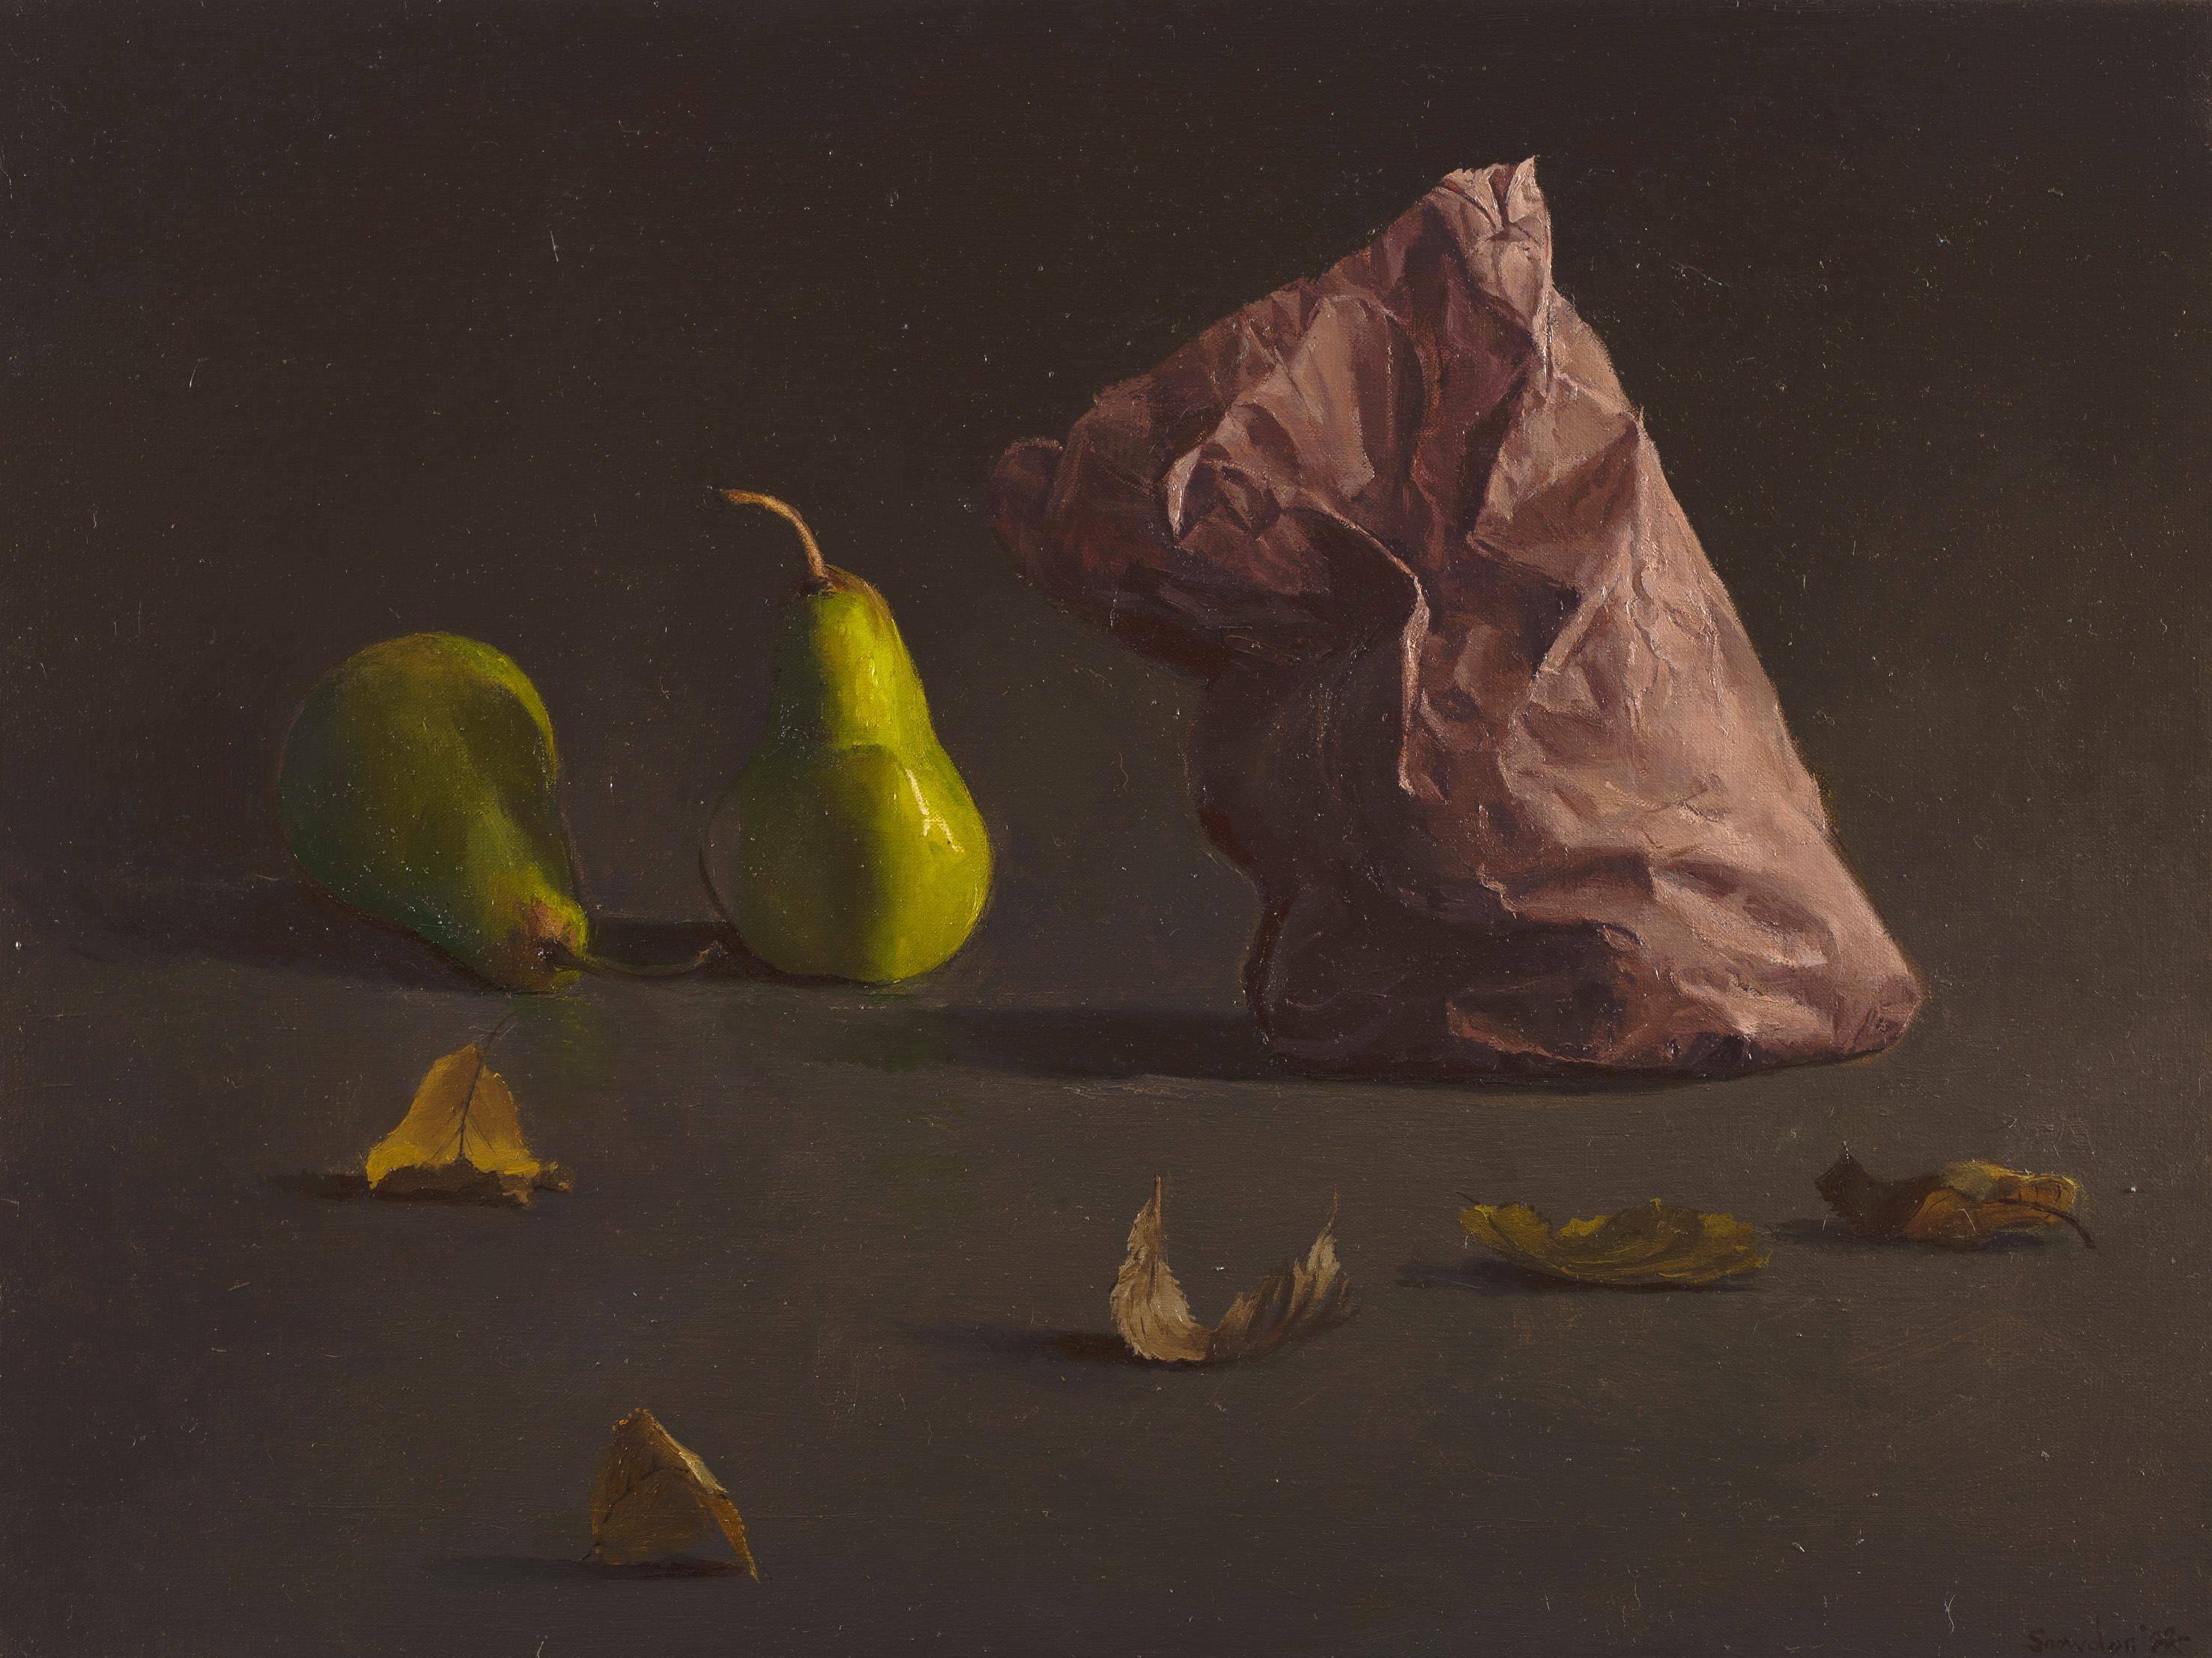 Paper bag with pears I, contemporary still life oil painting by Tim Snowdon